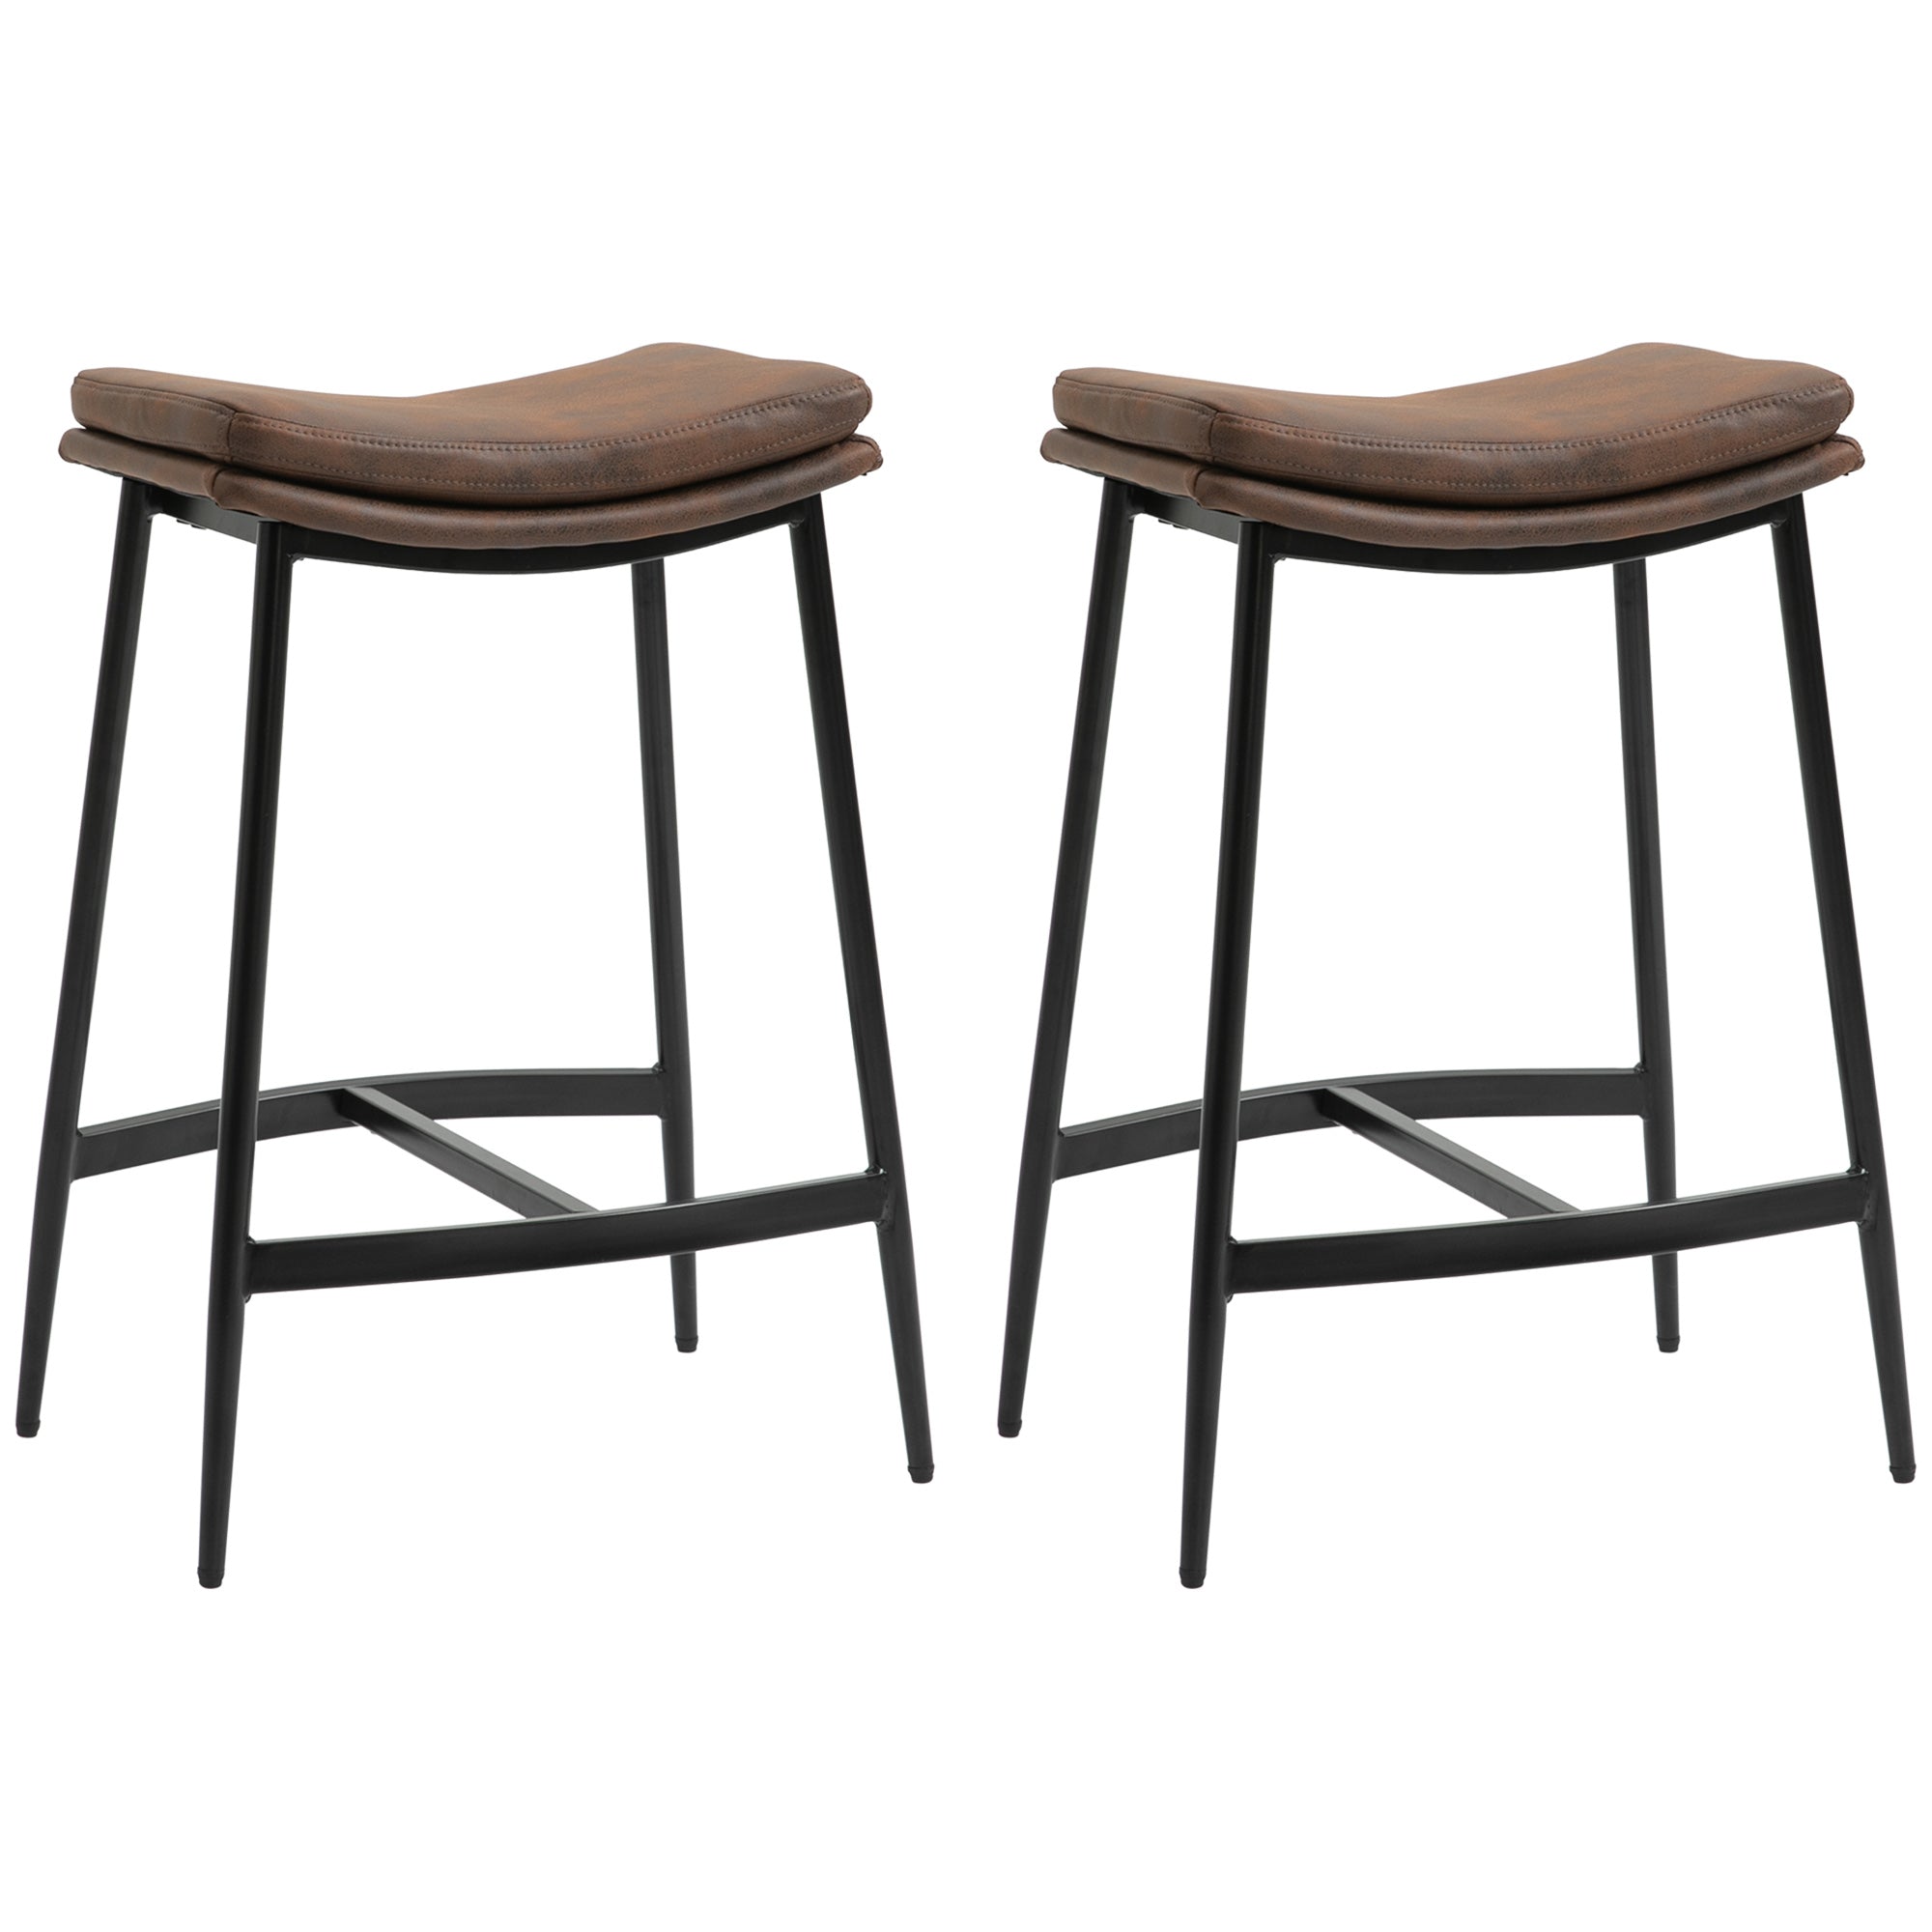 Breakfast Bar Stools Set of 2, Microfibre Upholstered Barstools, Industrial Bar Chairs with Curved Seat and Steel Frame  AOSOM   